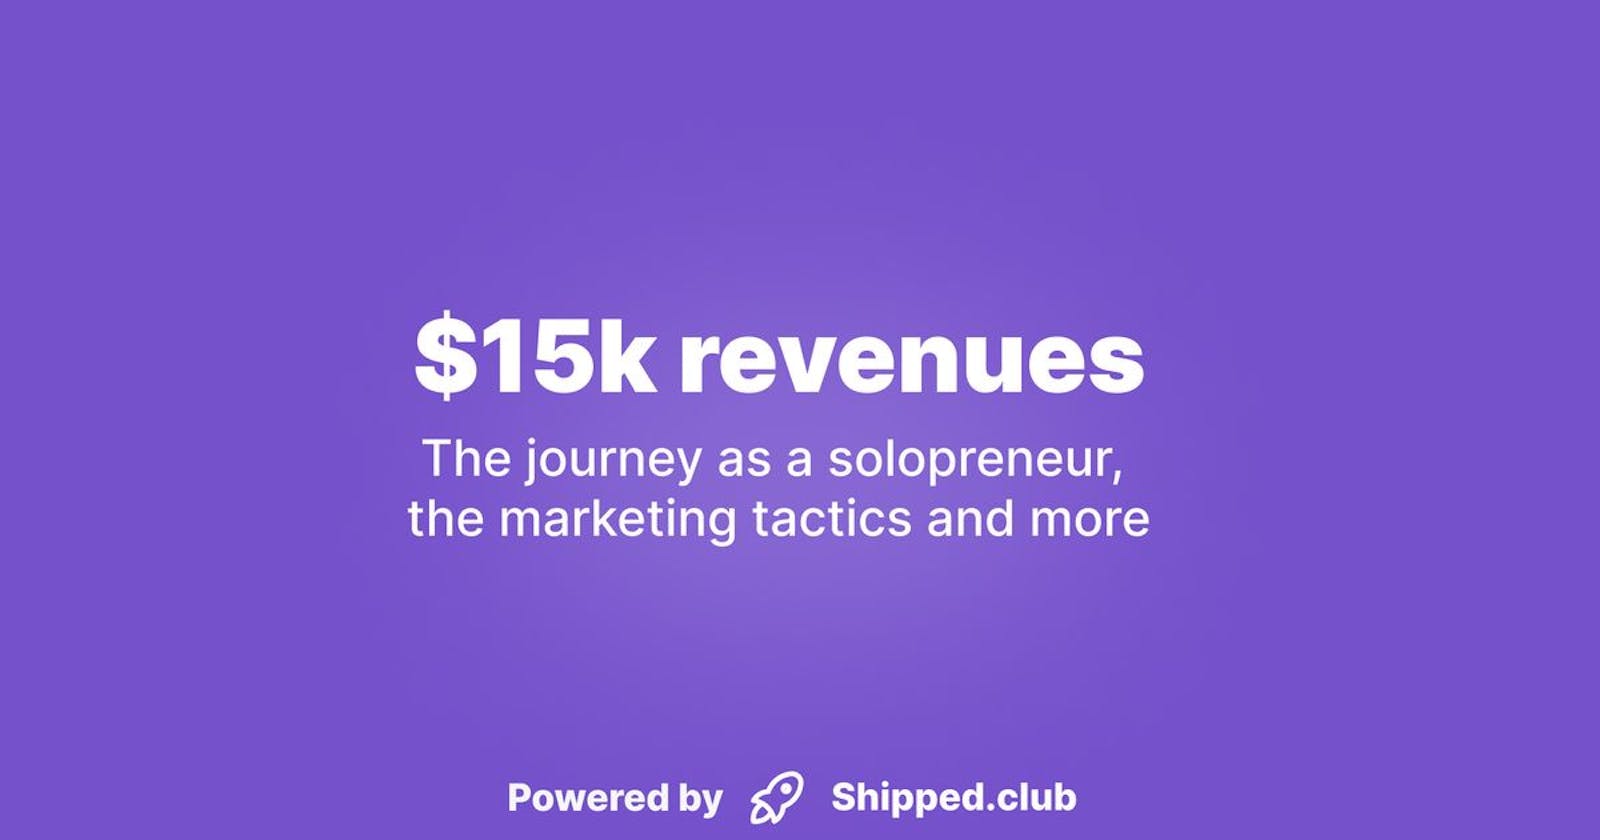 How I generated $15k revenues in <4 months